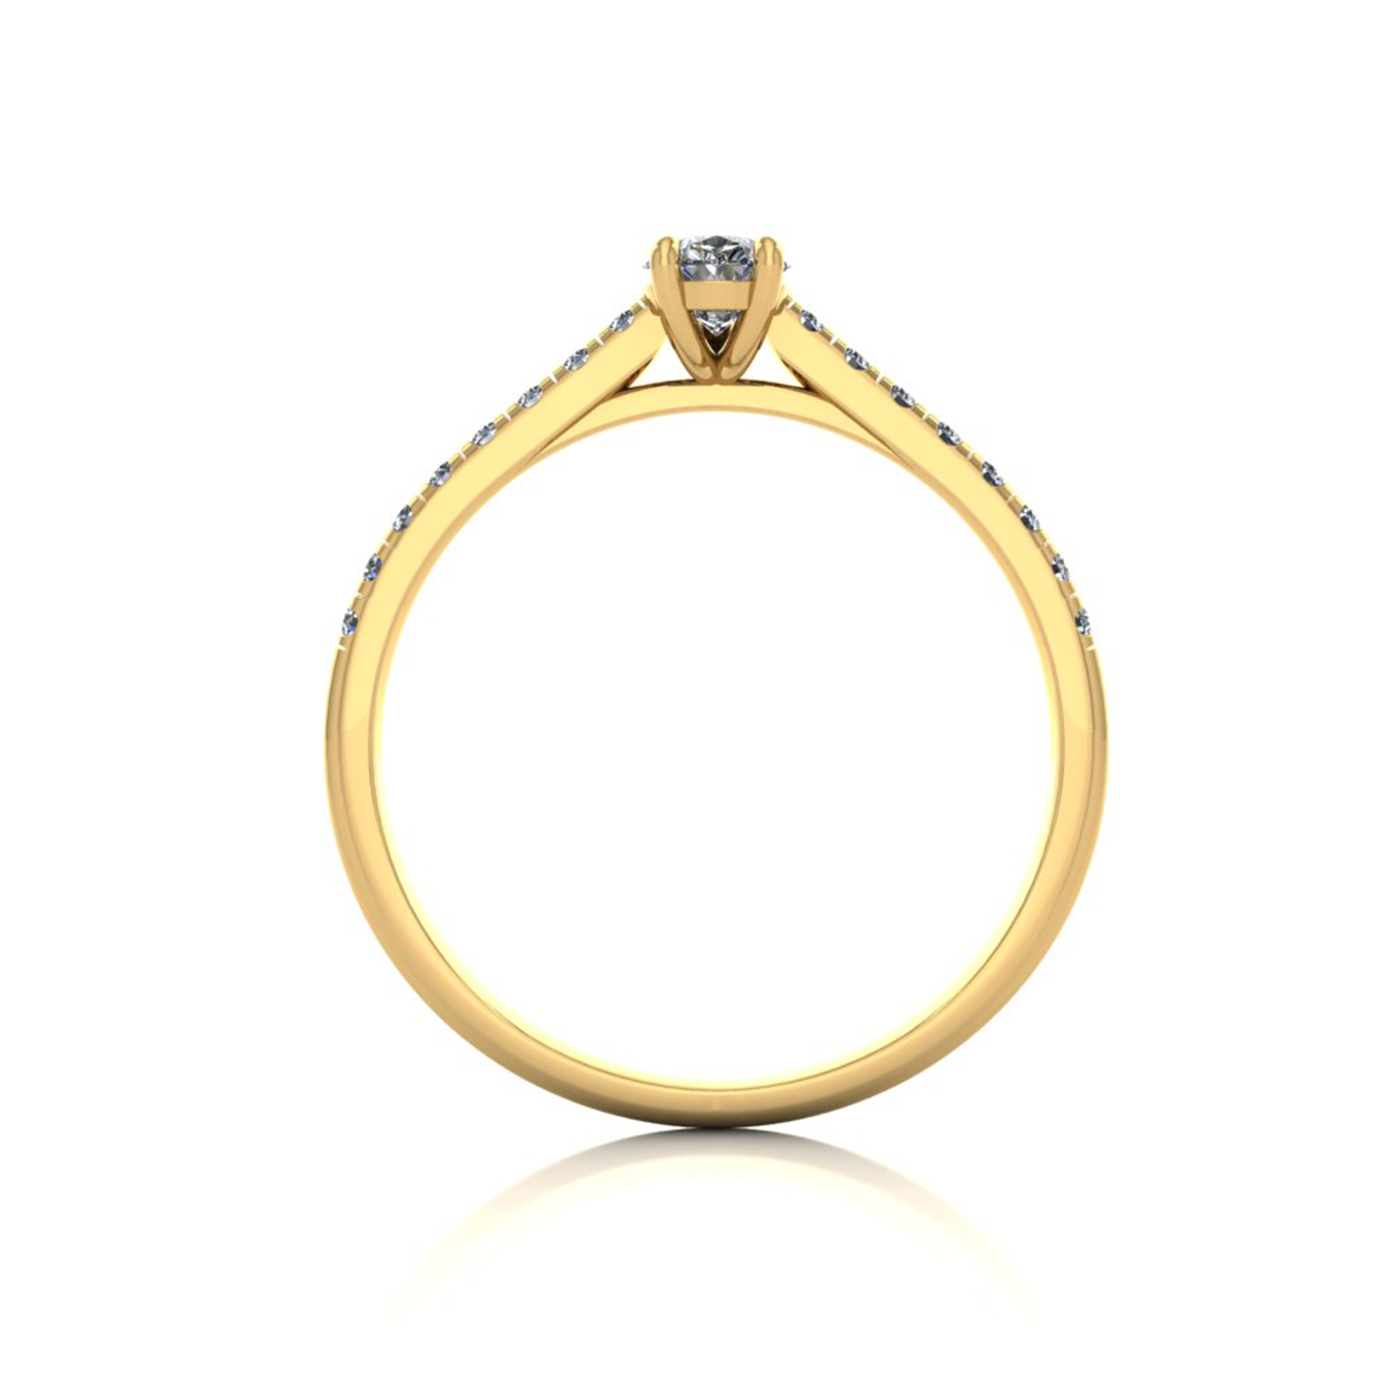 18k yellow gold  0,30 ct 3 prongs pear diamond engagement ring with whisper thin pavÉ set band